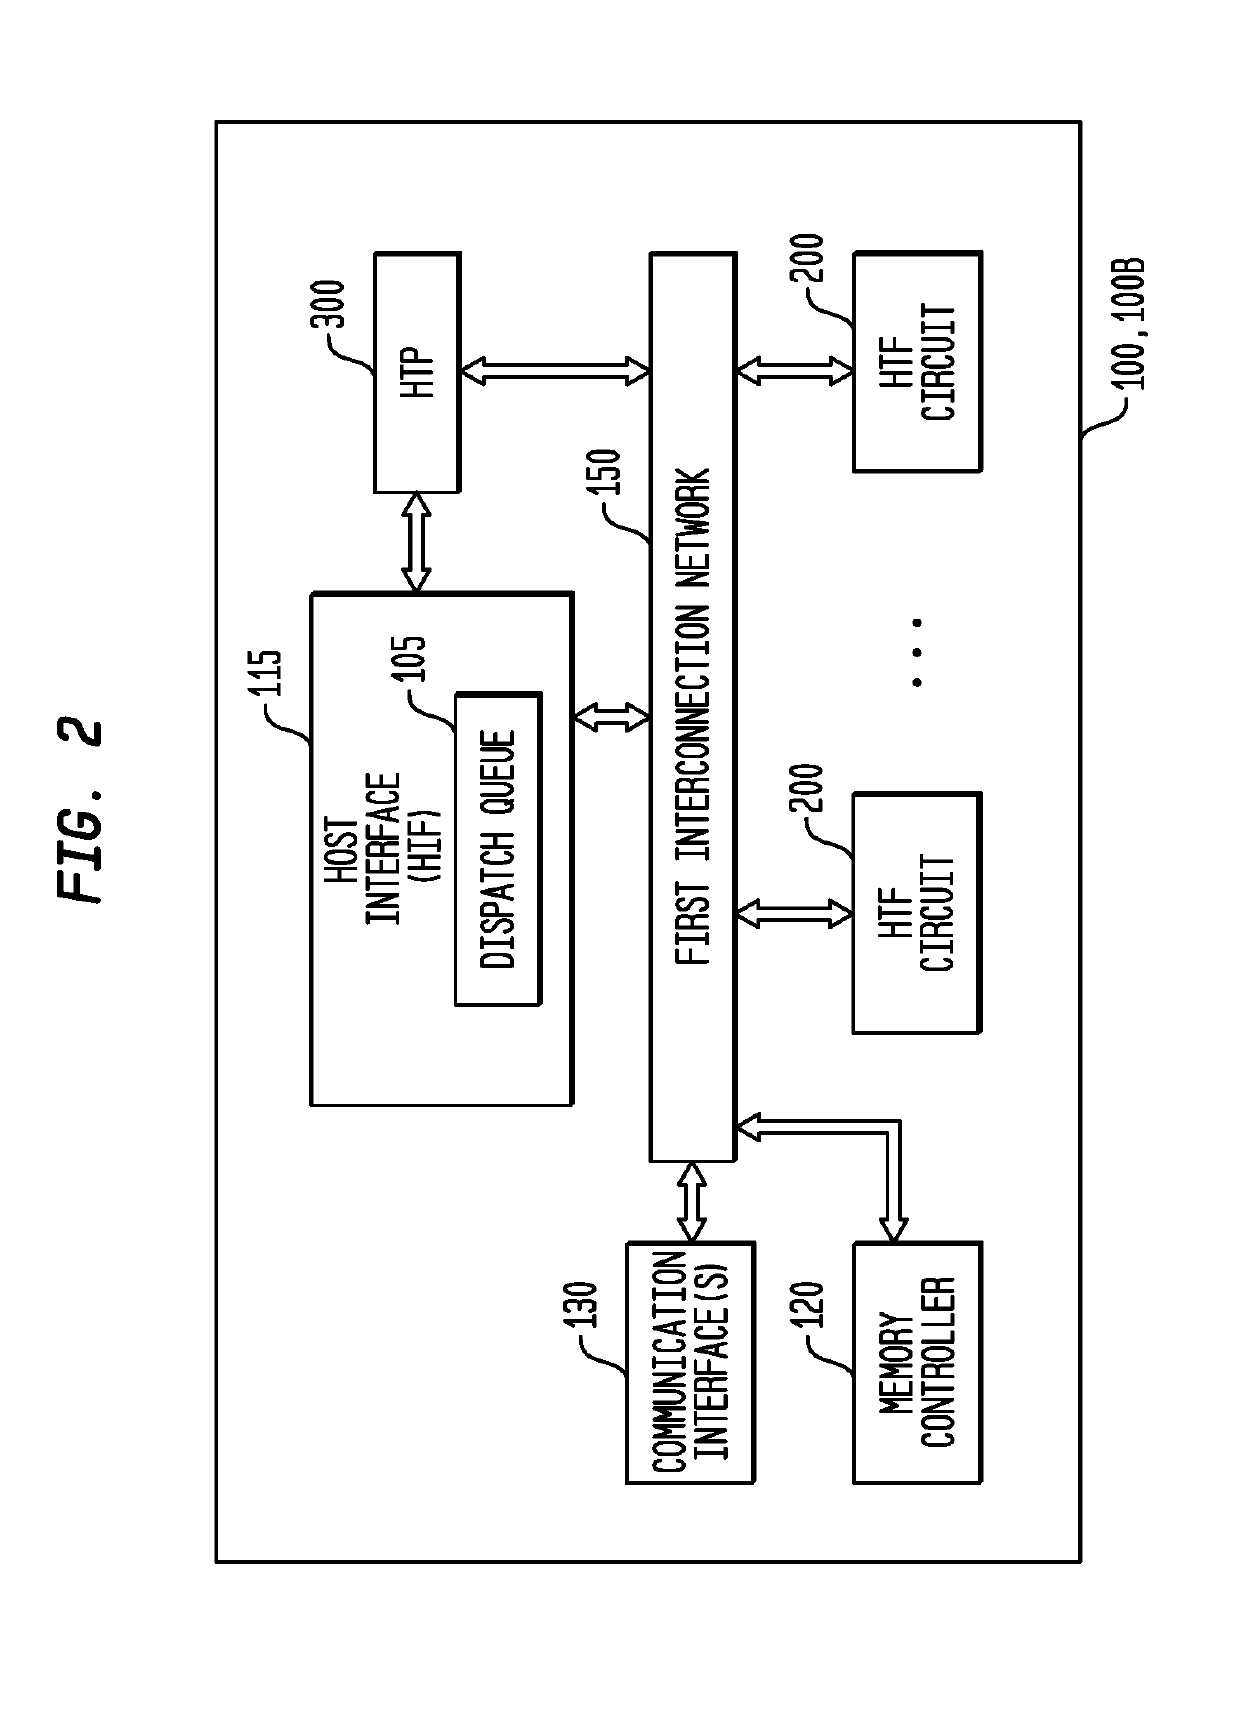 Conditional Branching Control for a Multi-Threaded, Self-Scheduling Reconfigurable Computing Fabric